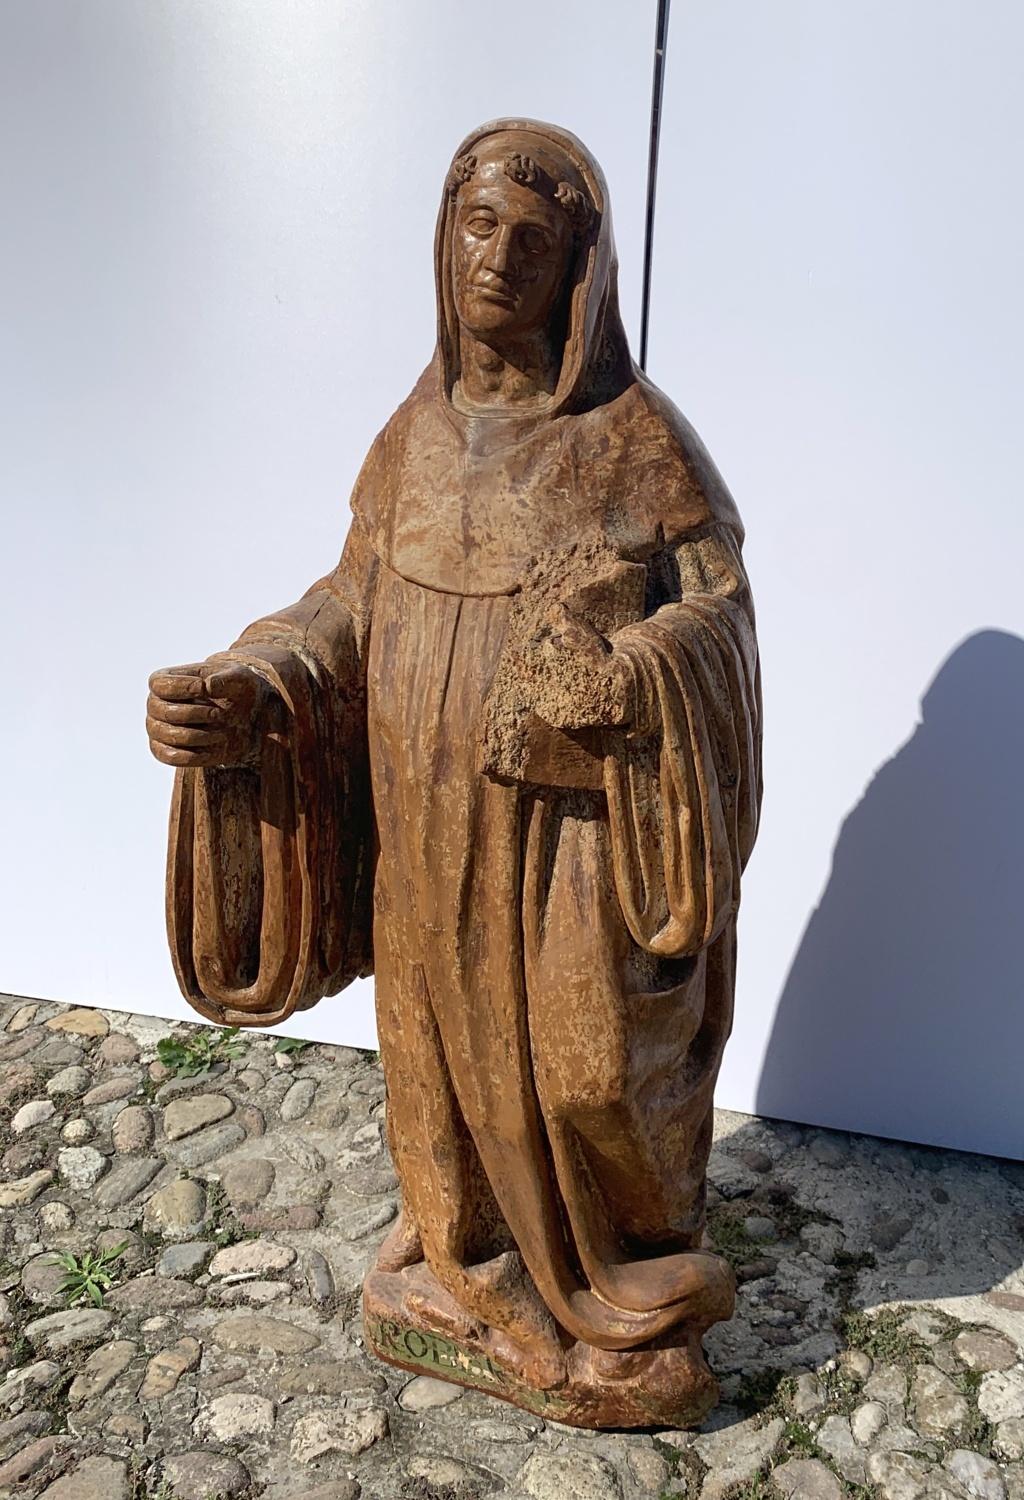 Carved wooden sculpture - San Roberto. Italy, 16th century.

54 x 30 x h 112 cm.

Entirely in carved and painted wood with traces of polychromy and gilding.

- Work registered at the base: 